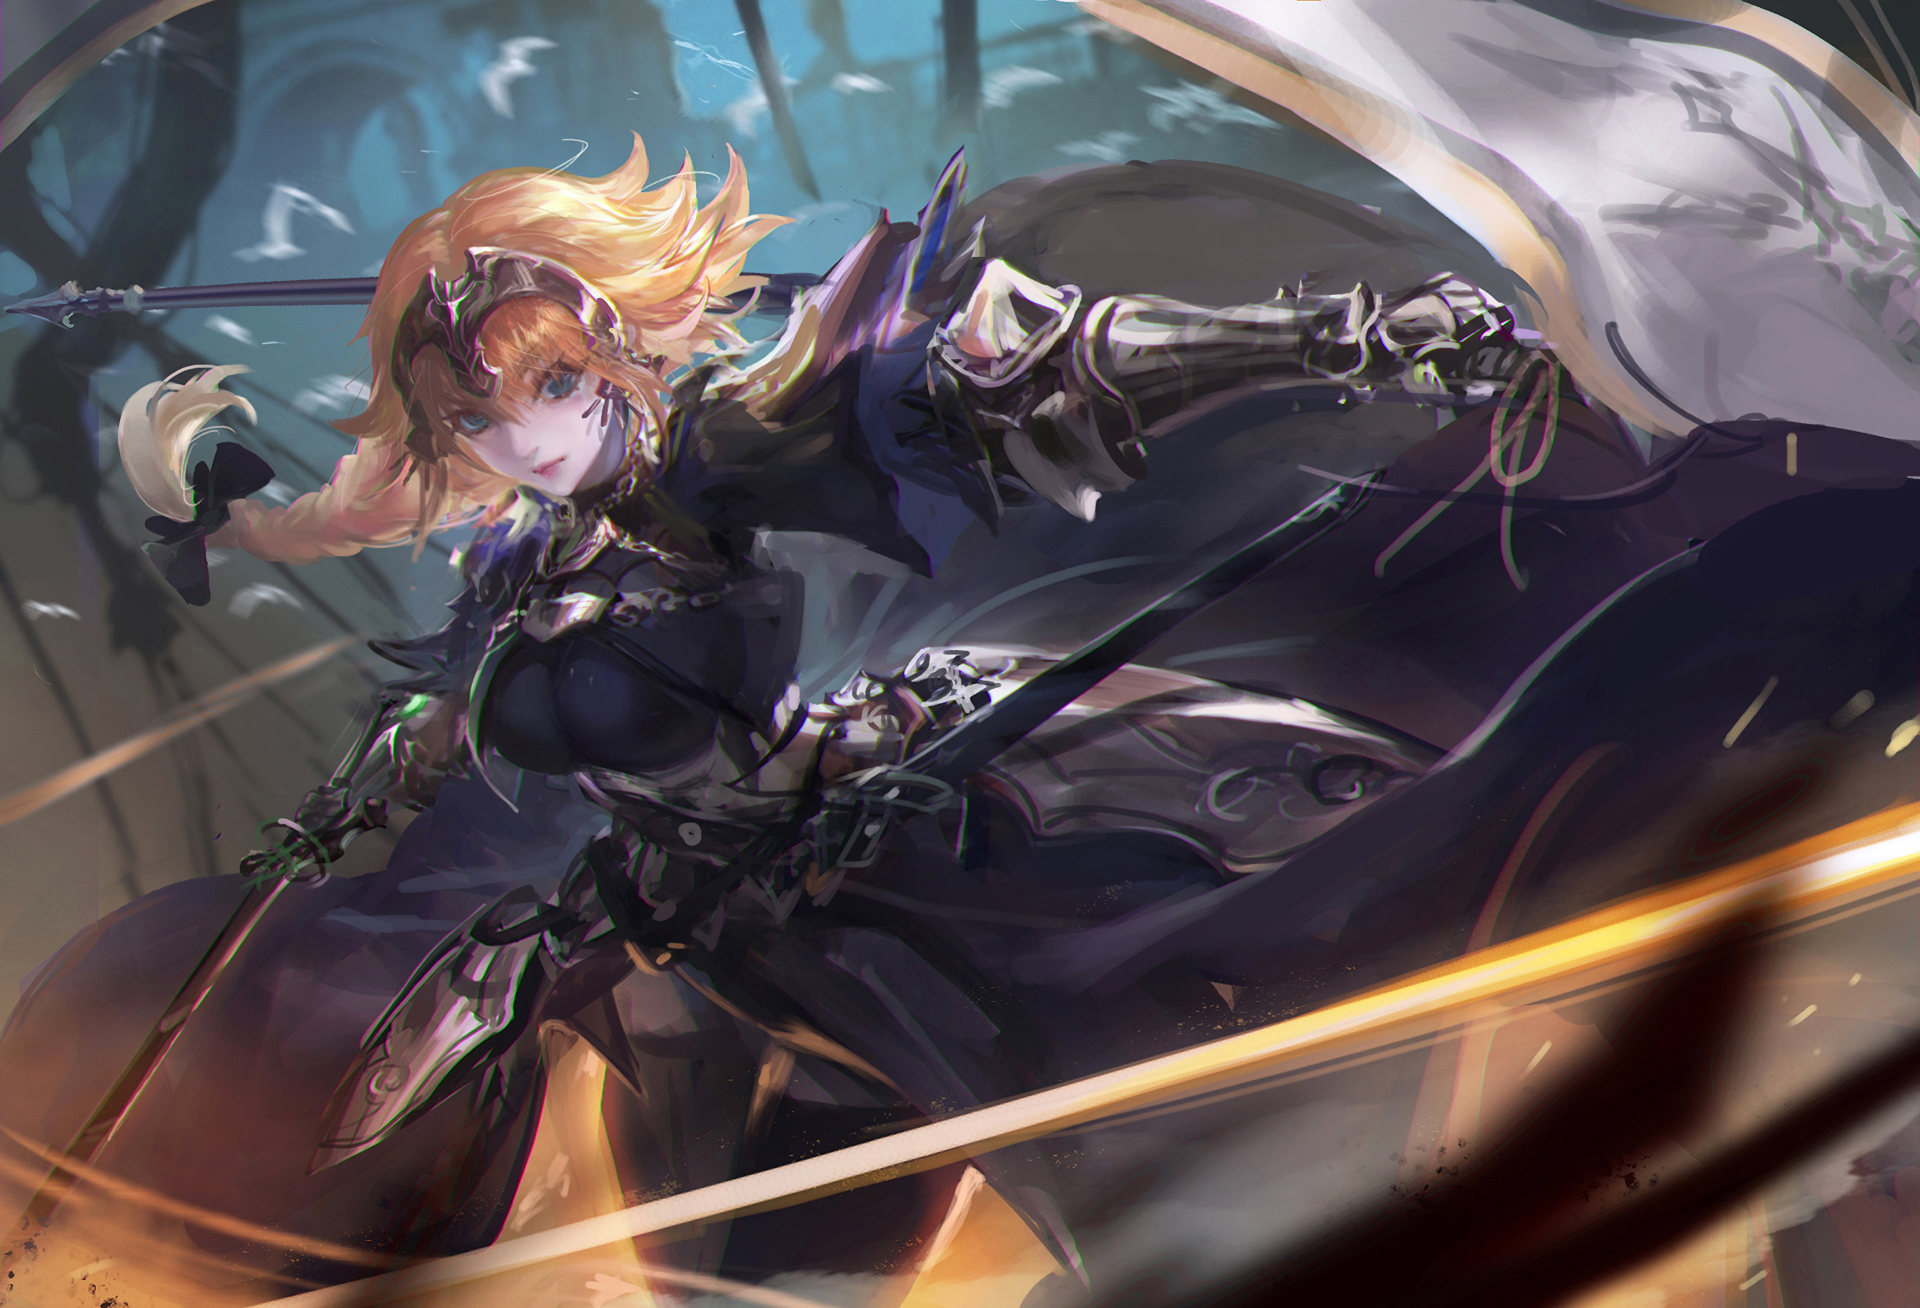 Anime 1920x1308 Fate series Fate/Apocrypha  Fate/Grand Order armored woman big boobs violet dress braided hair thighs black stockings gauntlets anime girls female warrior messy hair birds women with swords 2D Ruler (Fate/Apocrypha) Jeanne d'Arc (Fate) anime long hair bangs hair in face french braid sheath looking at the side red lipstick pale fan art curvy blonde